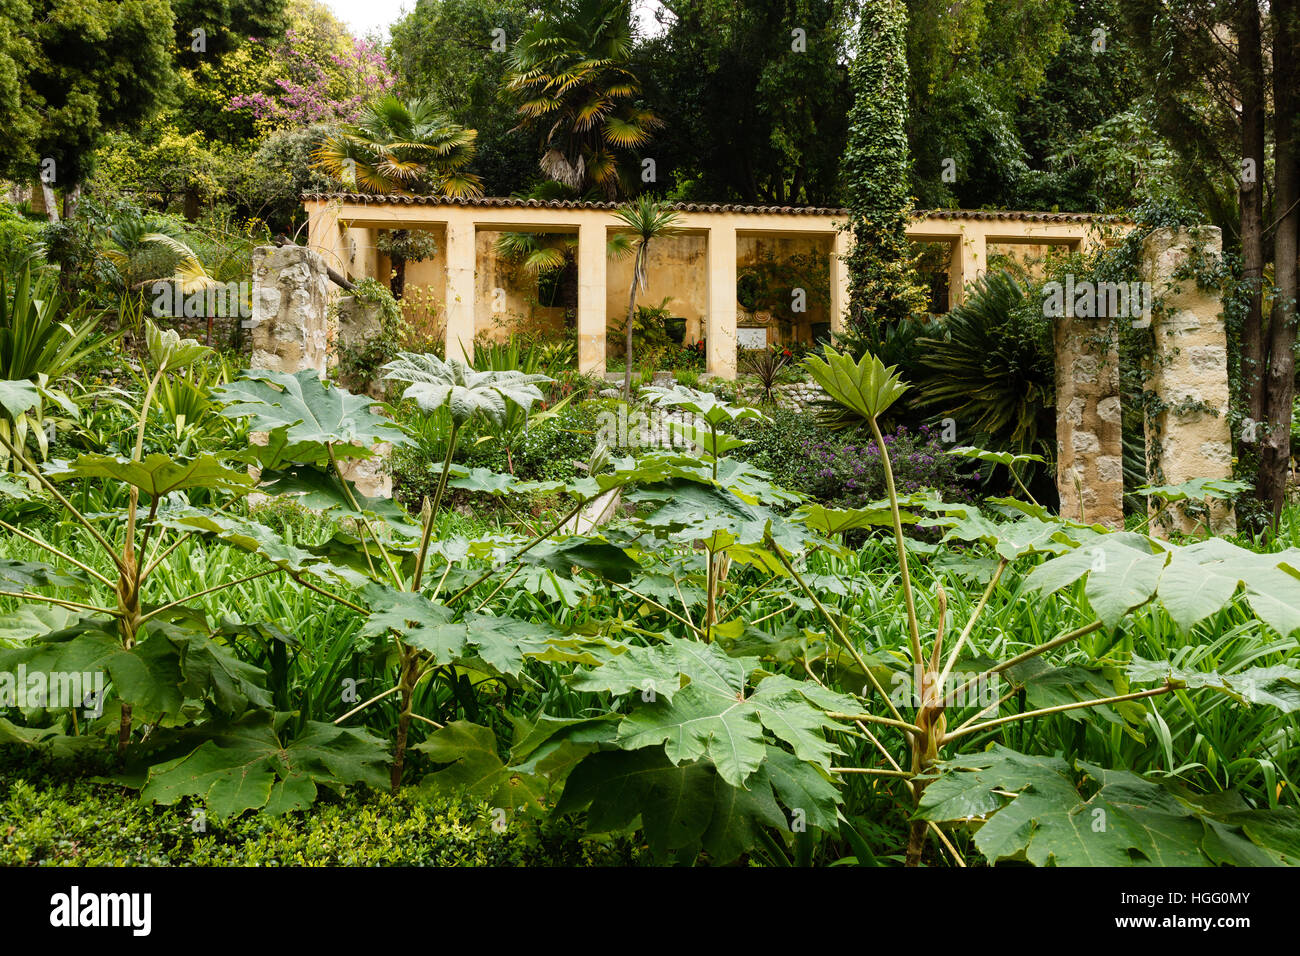 France, Alpes-Maritimes, Menton, garden Serre de la Madone : The former restored greenhouse whose windows have been removed with Tetrapanax in front. Stock Photo